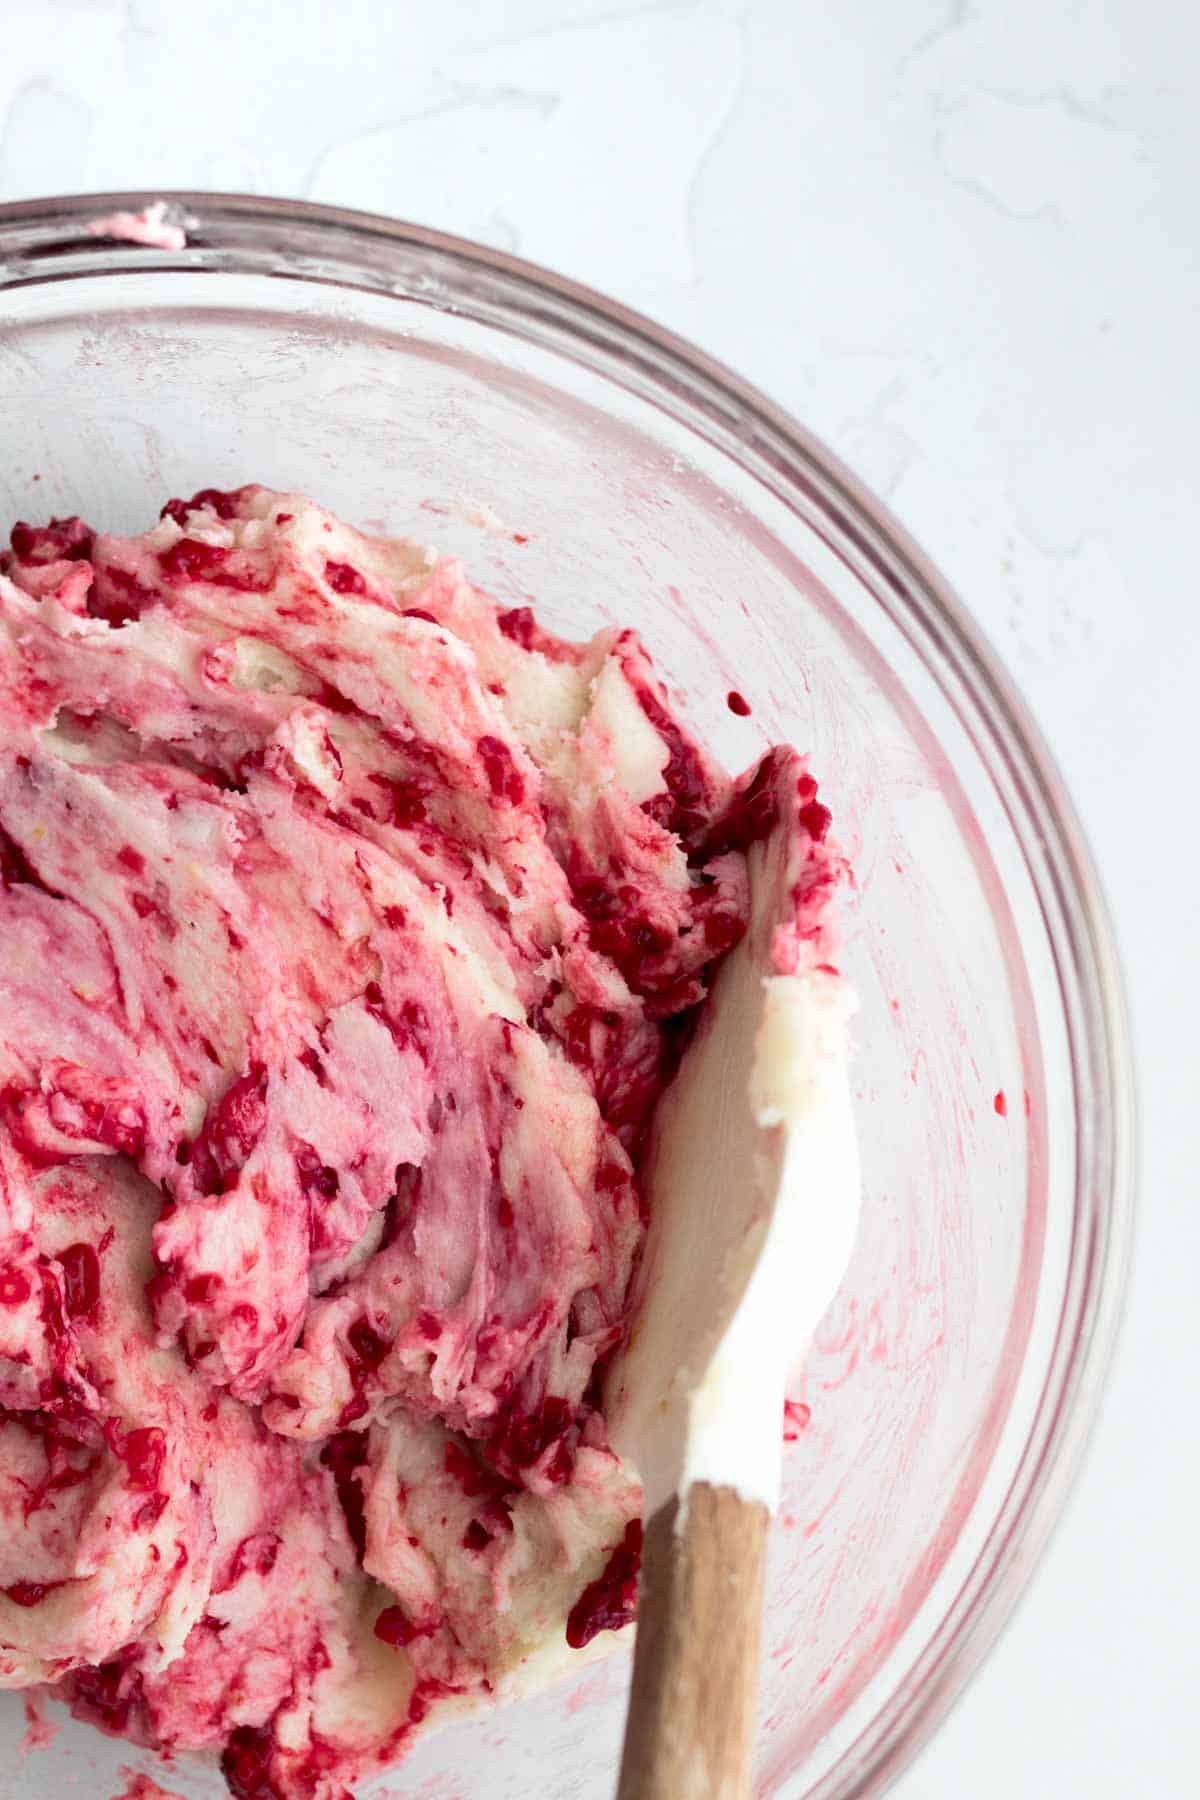 Adding the frozen raspberries into the batter.